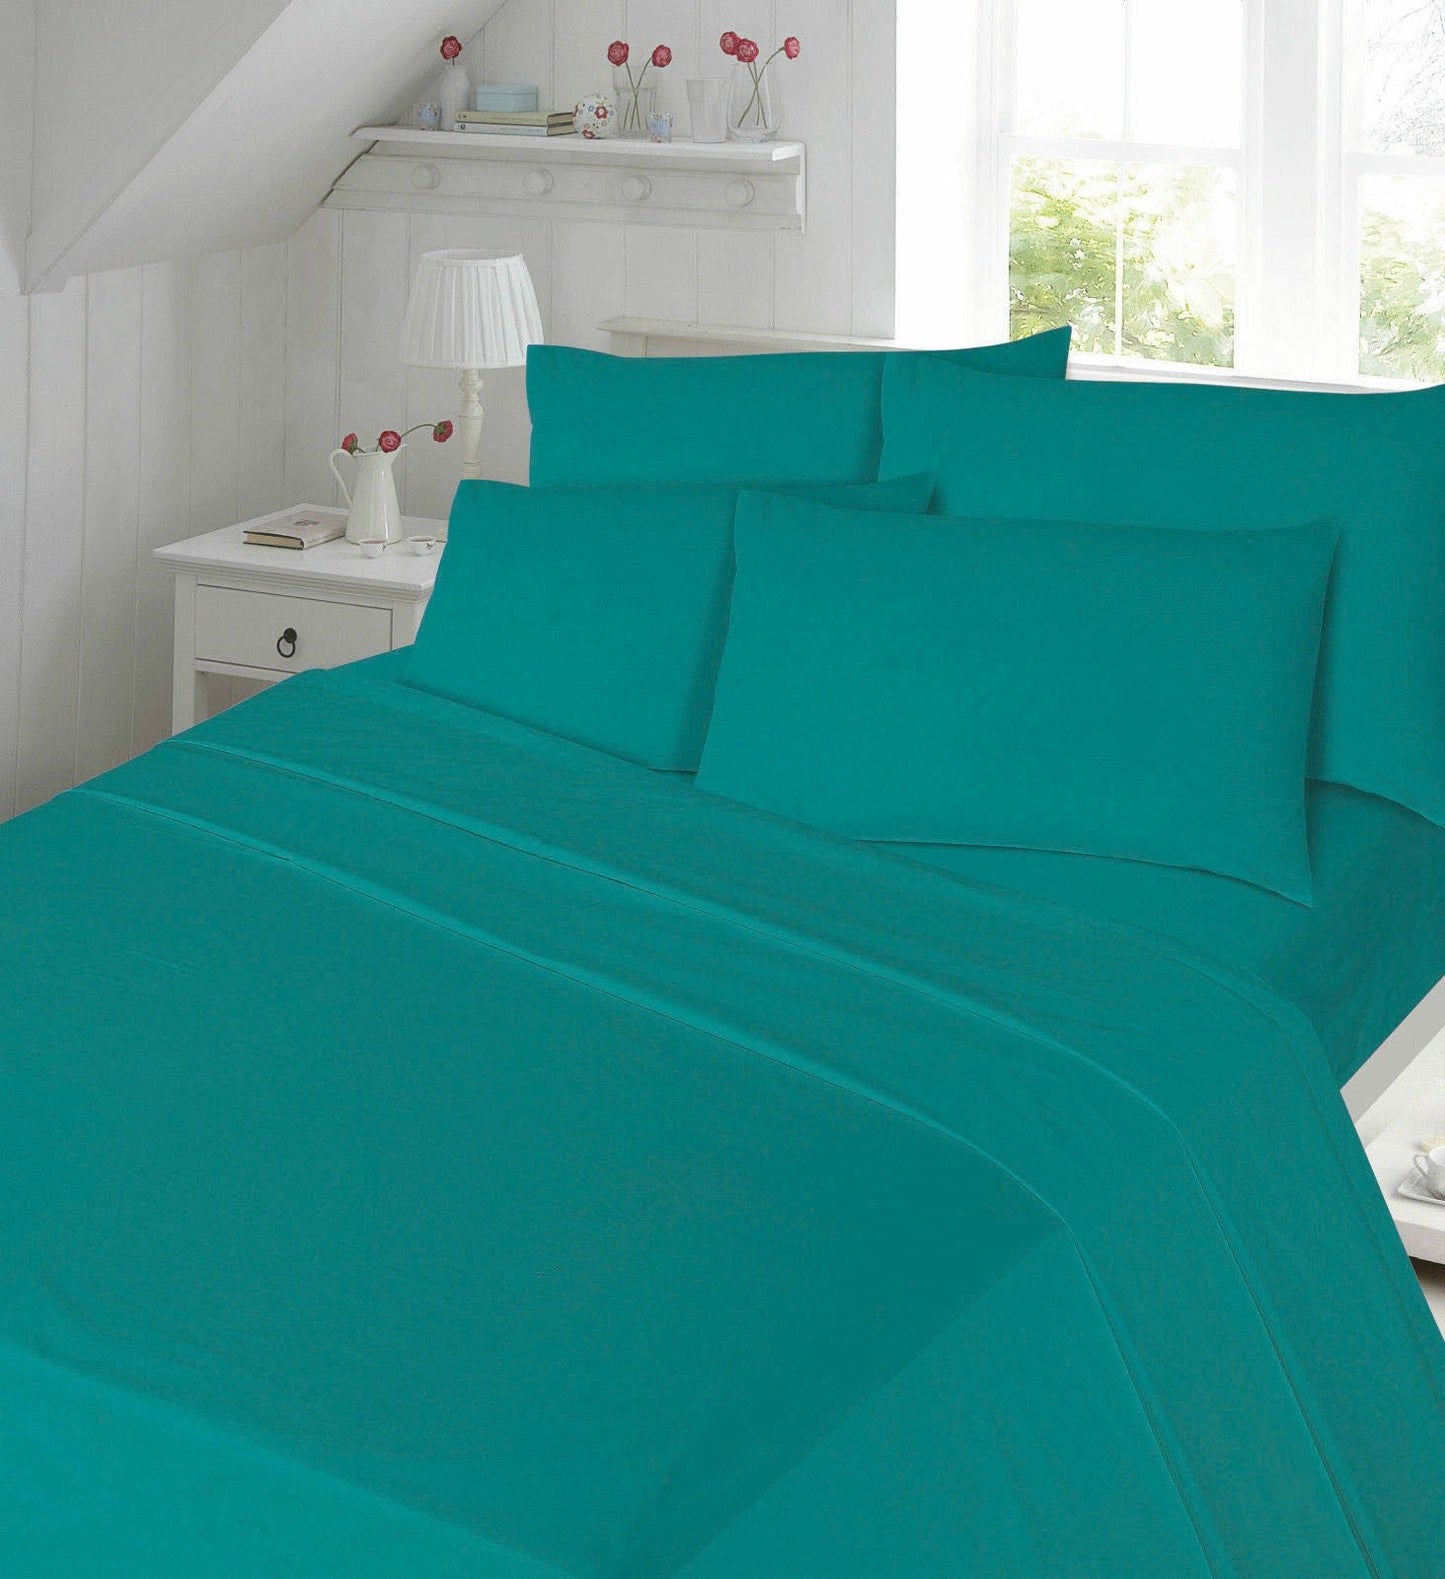 Flannelette Fitted Sheet Cotton Thermal With FREE MATCHING PILLOWCASE - TheComfortshop.co.ukBed Sheets0721718966487thecomfortshopTheComfortshop.co.ukFLNT FIT FREE PP Teal SingleTealFitted Sheet Single OnlyFlannelette Fitted Sheet Cotton Thermal With FREE MATCHING PILLOWCASE - TheComfortshop.co.uk